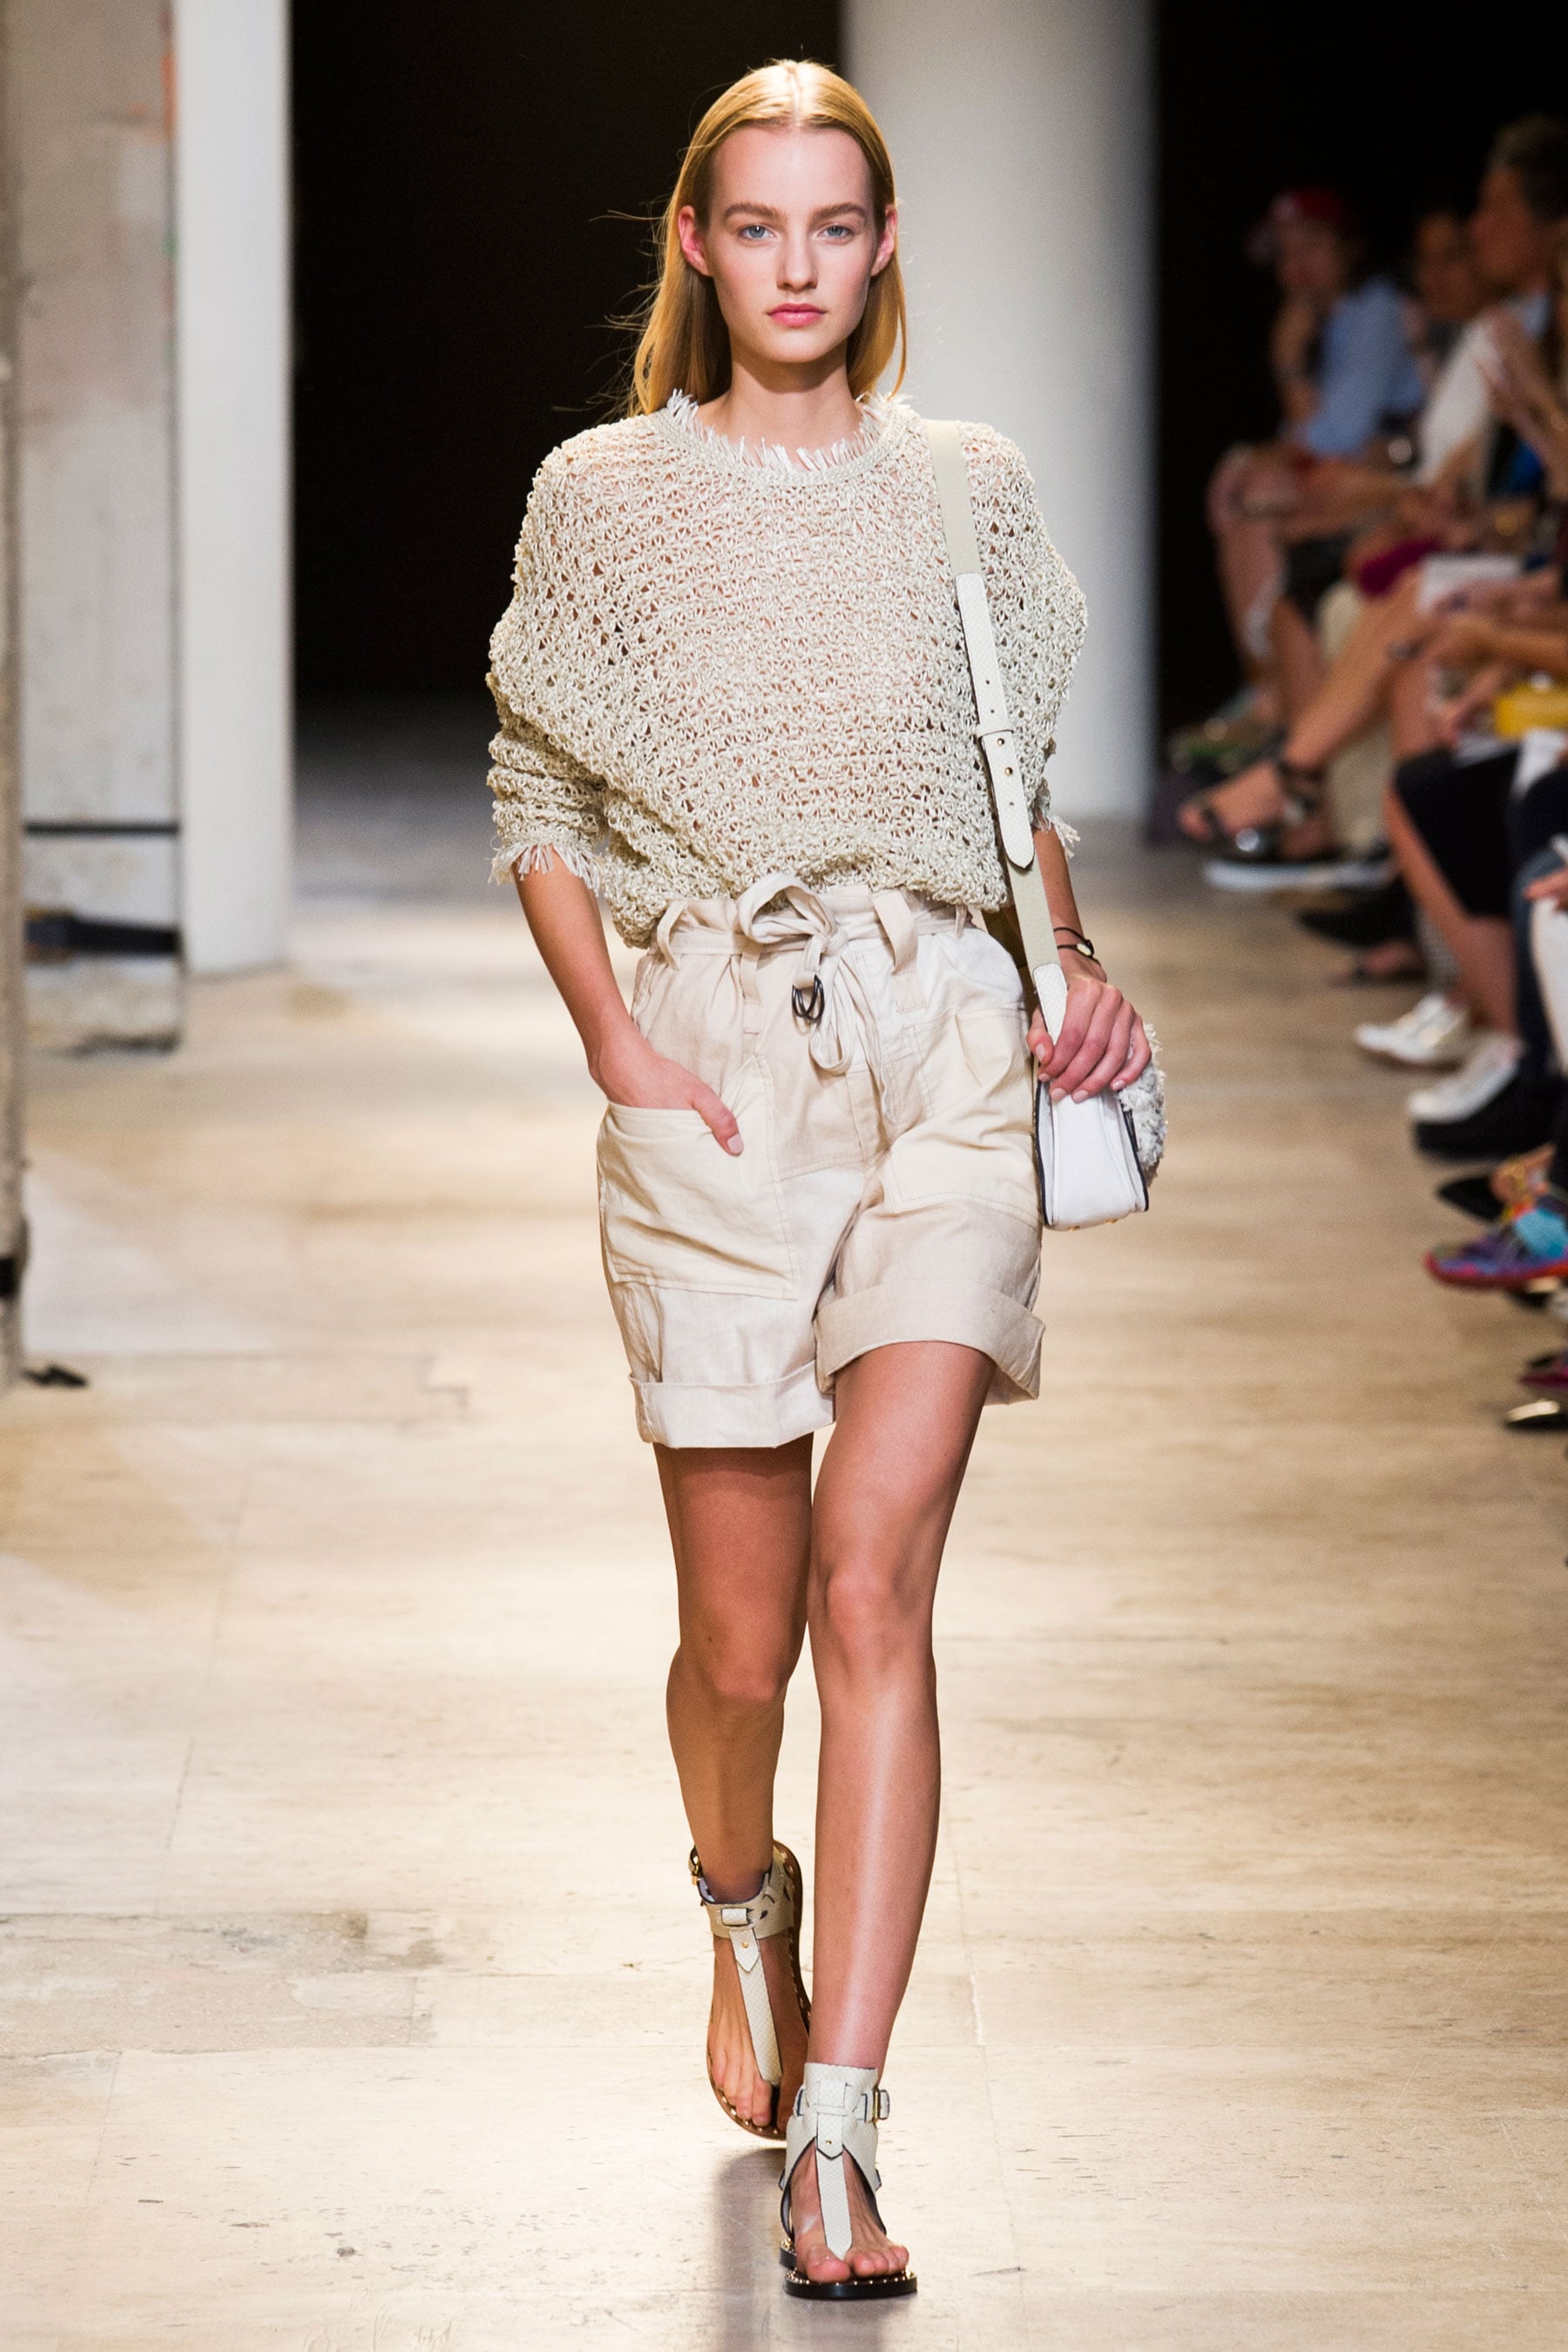 ideologie nogmaals twintig Isabel Marant Spring 2015 | The 10 Runway Trends You'll Be Wearing All  Spring | POPSUGAR Fashion Photo 94